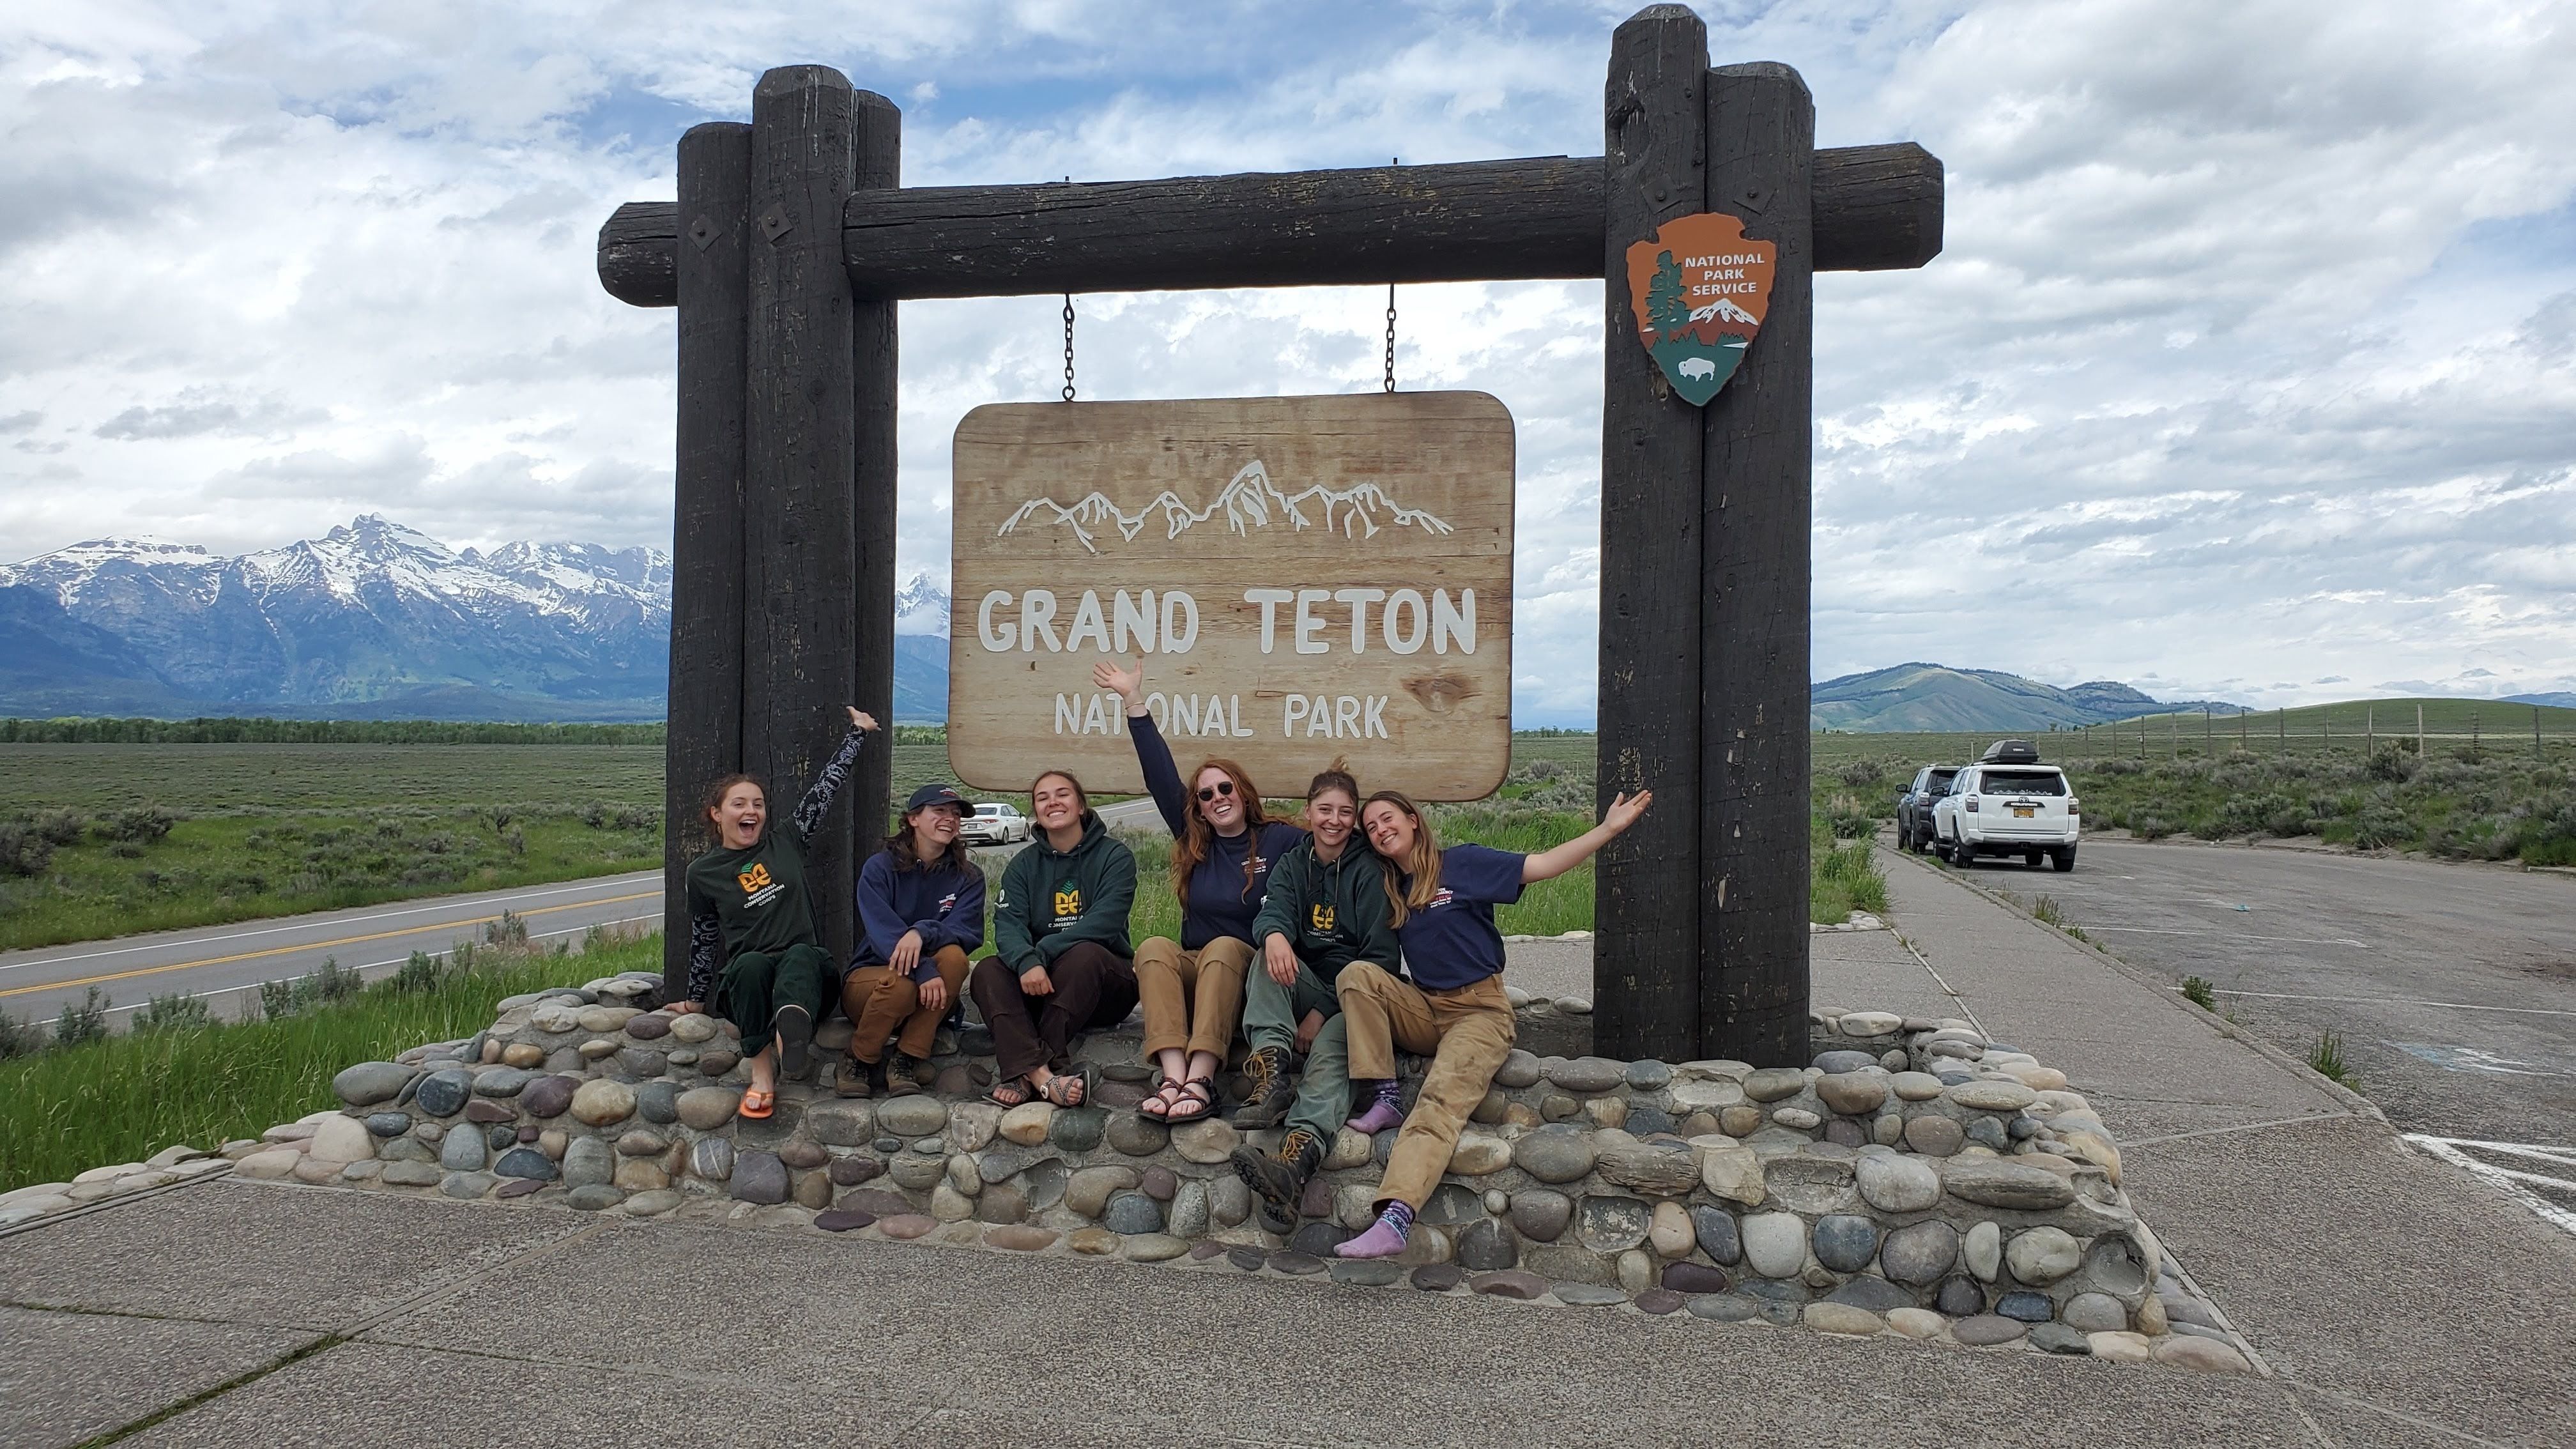 An all women's crew poses in front of the sign for Grand Teton National Park. There are mountains in the background